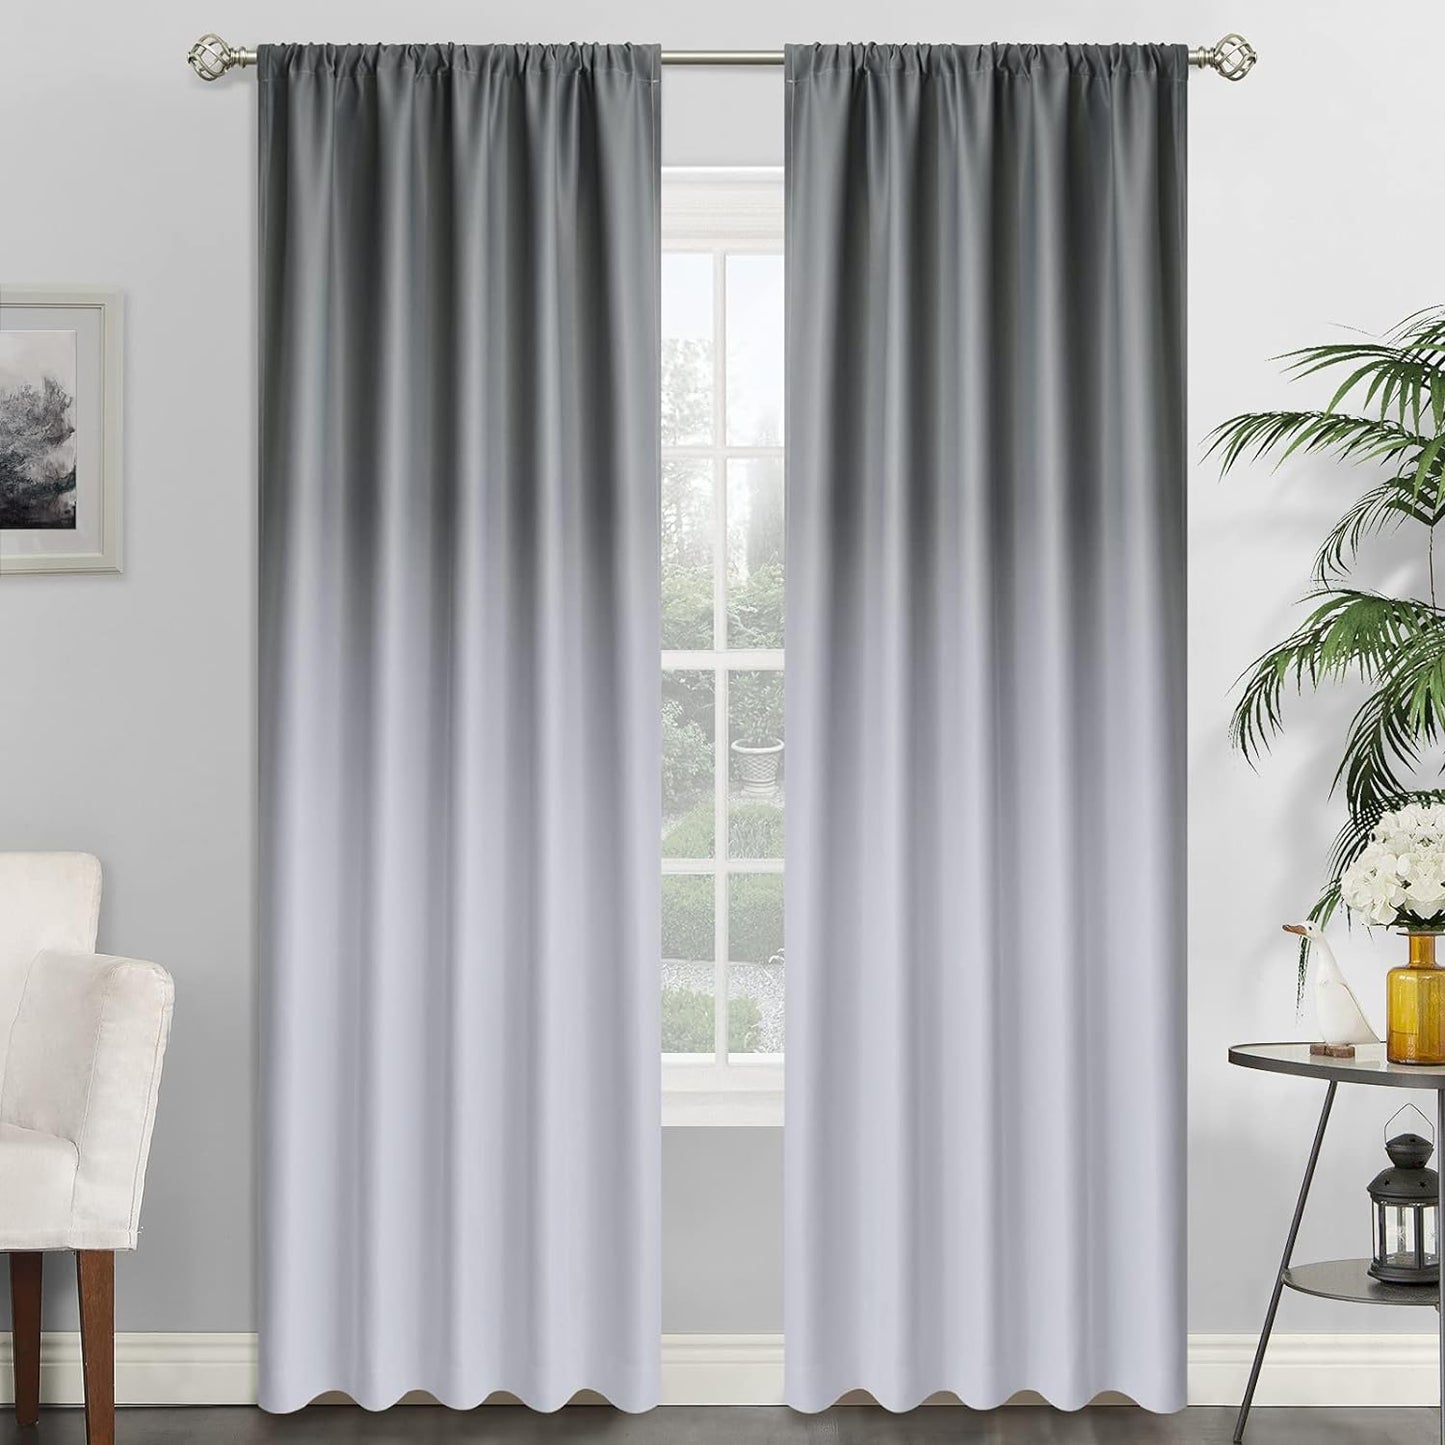 Simplehome Ombre Room Darkening Curtains for Bedroom, Light Blocking Gradient Purple to Greyish White Thermal Insulated Rod Pocket Window Curtains Drapes for Living Room,2 Panels, 52X84 Inches Length  SimpleHome Grey 1 52W X 84L / 2 Panels 